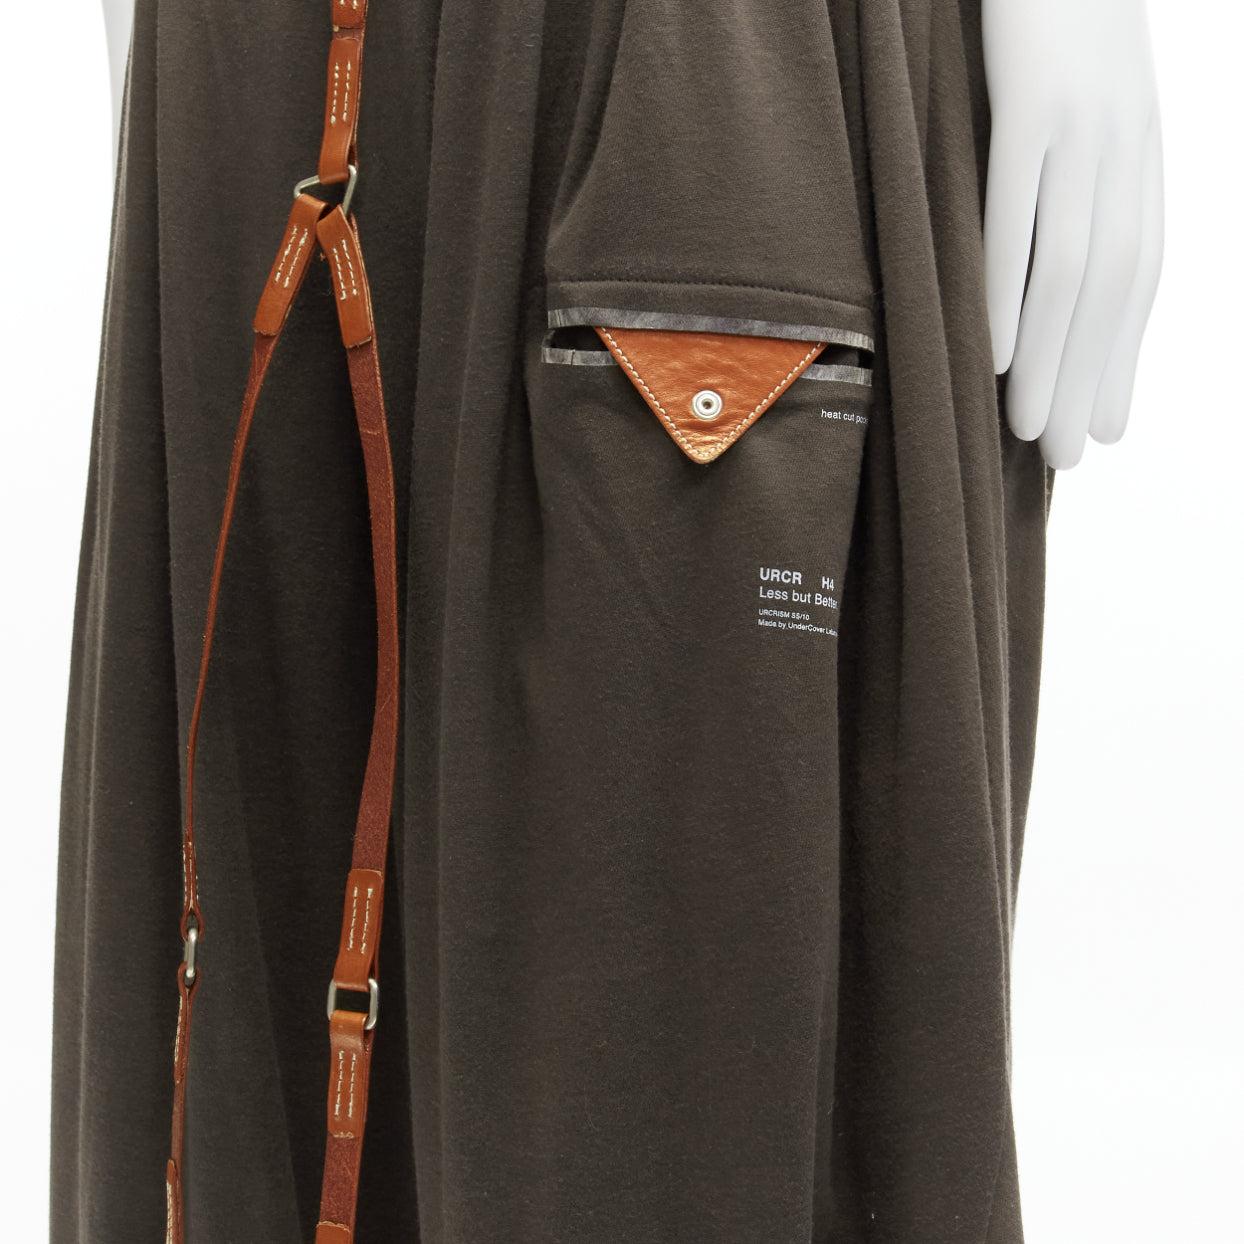 UNDERCOVER charcoal brown cotton brown leather suspenders drop crotch jogger pants JP1 S
Reference: CAWG/A00254
Brand: Undercover
Material: Cotton, Blend, Leather
Color: Brown, Tan Brown
Pattern: Solid
Closure: Elasticated
Lining: Brown Fabric
Extra